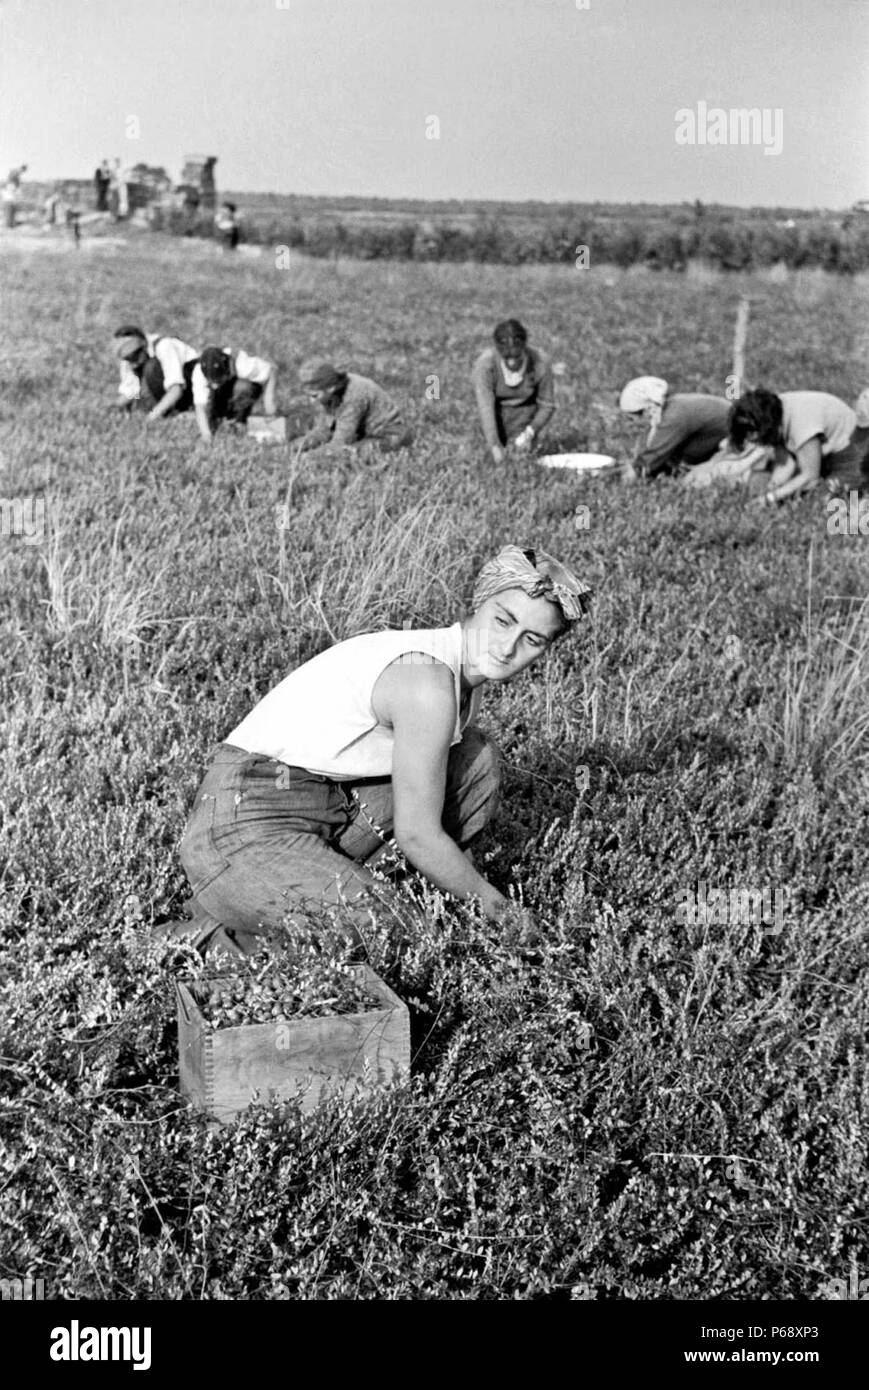 Arthur Rothstein (1915 - 1985) American photographer.; 'Woman picking cranberries'; Burlington County; New Jersey; 1938 during the Great depression Stock Photo